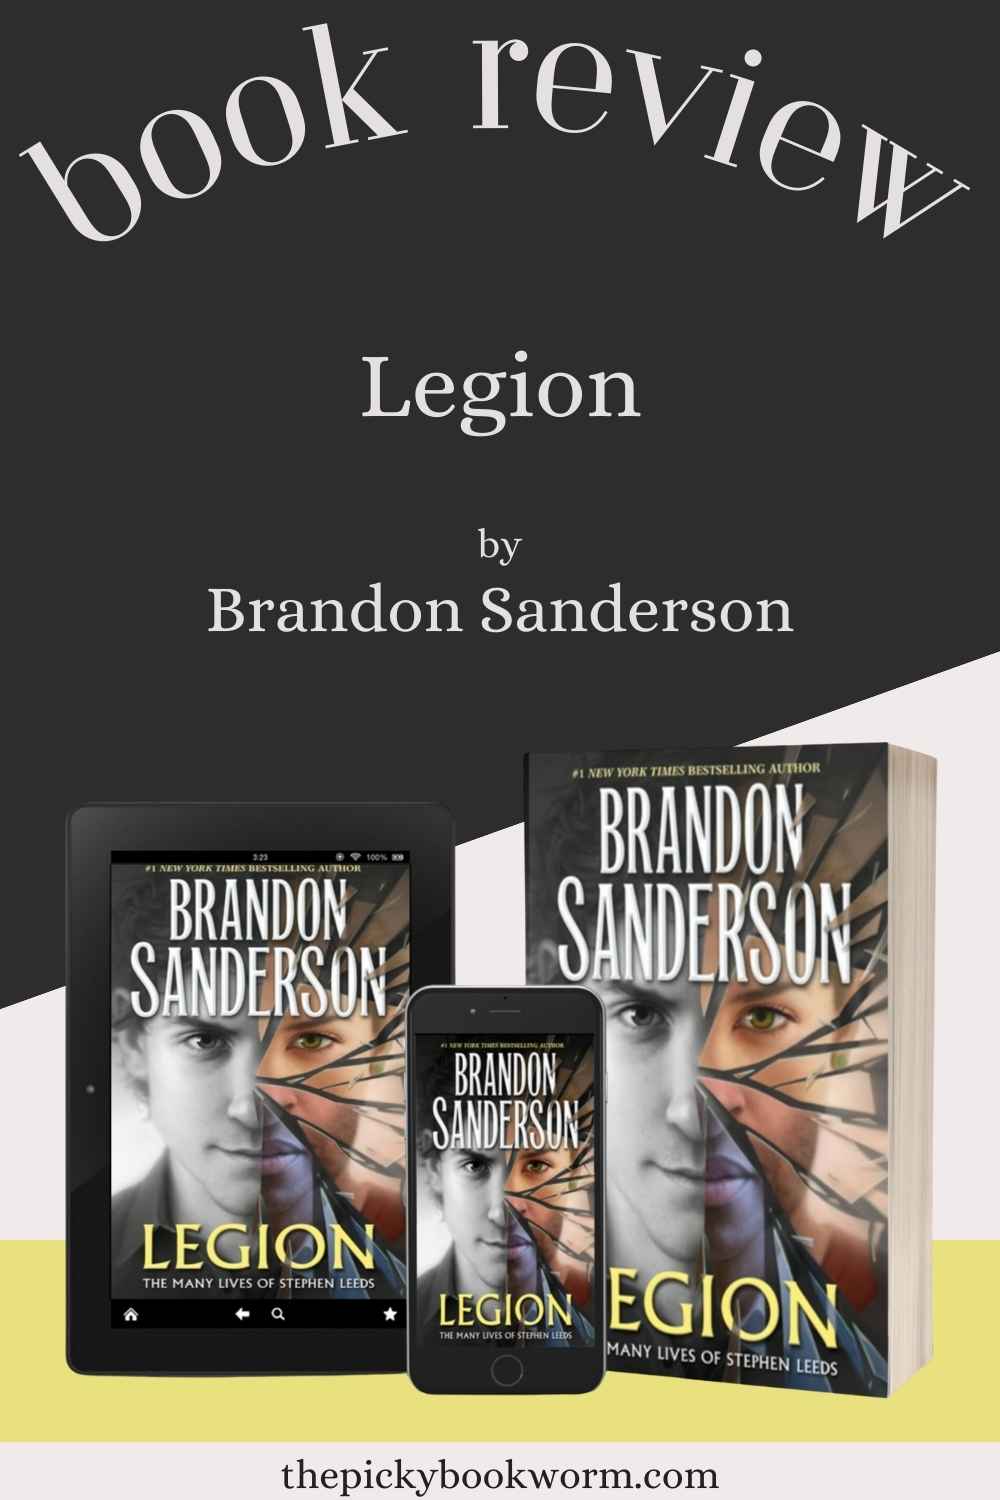 Book Review of Legion by Brandon Sanderson on The Picky Bookworm blog. Stephen isn't insane, his hallucinations are. I listened to this book on audio, and highly recommend you do the same.